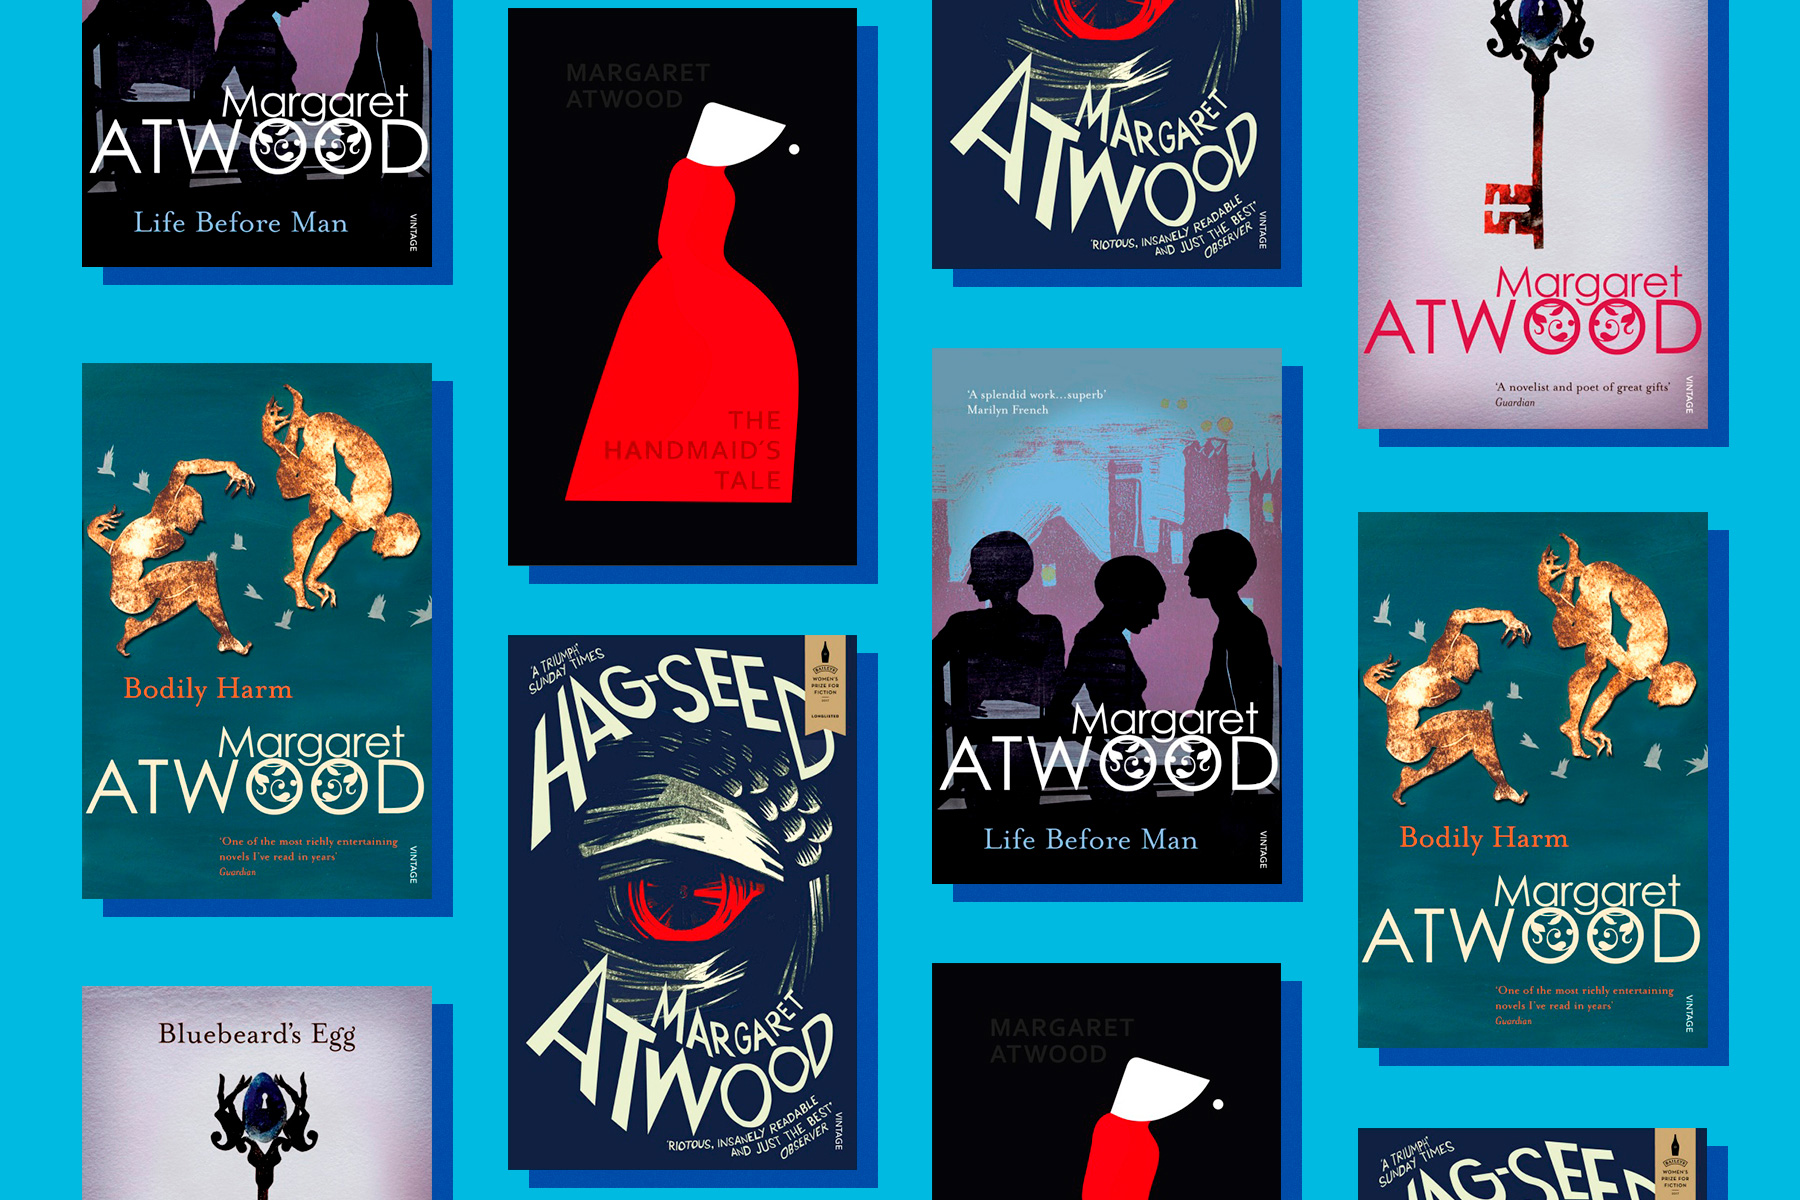 Covers of Margaret Atwood's books, including The Handmaid's Tale and Hag-Seed, against a blue background.